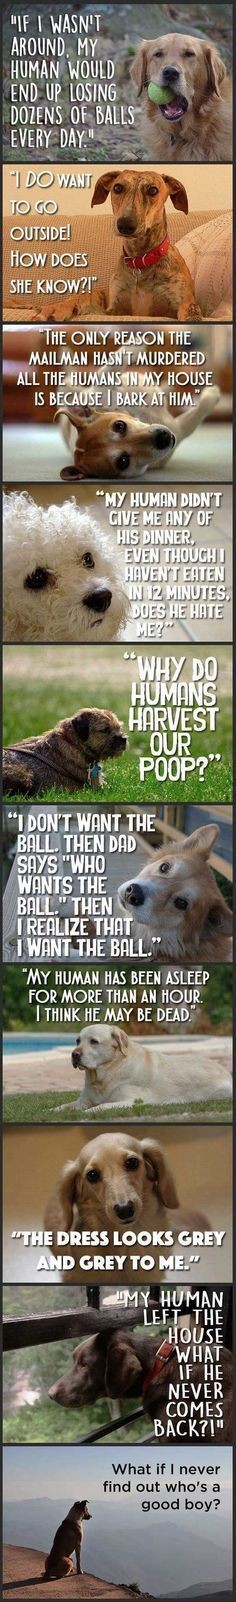 Just Dog Thoughts. #Animals #Dogs #Inspiring #Thoughts |